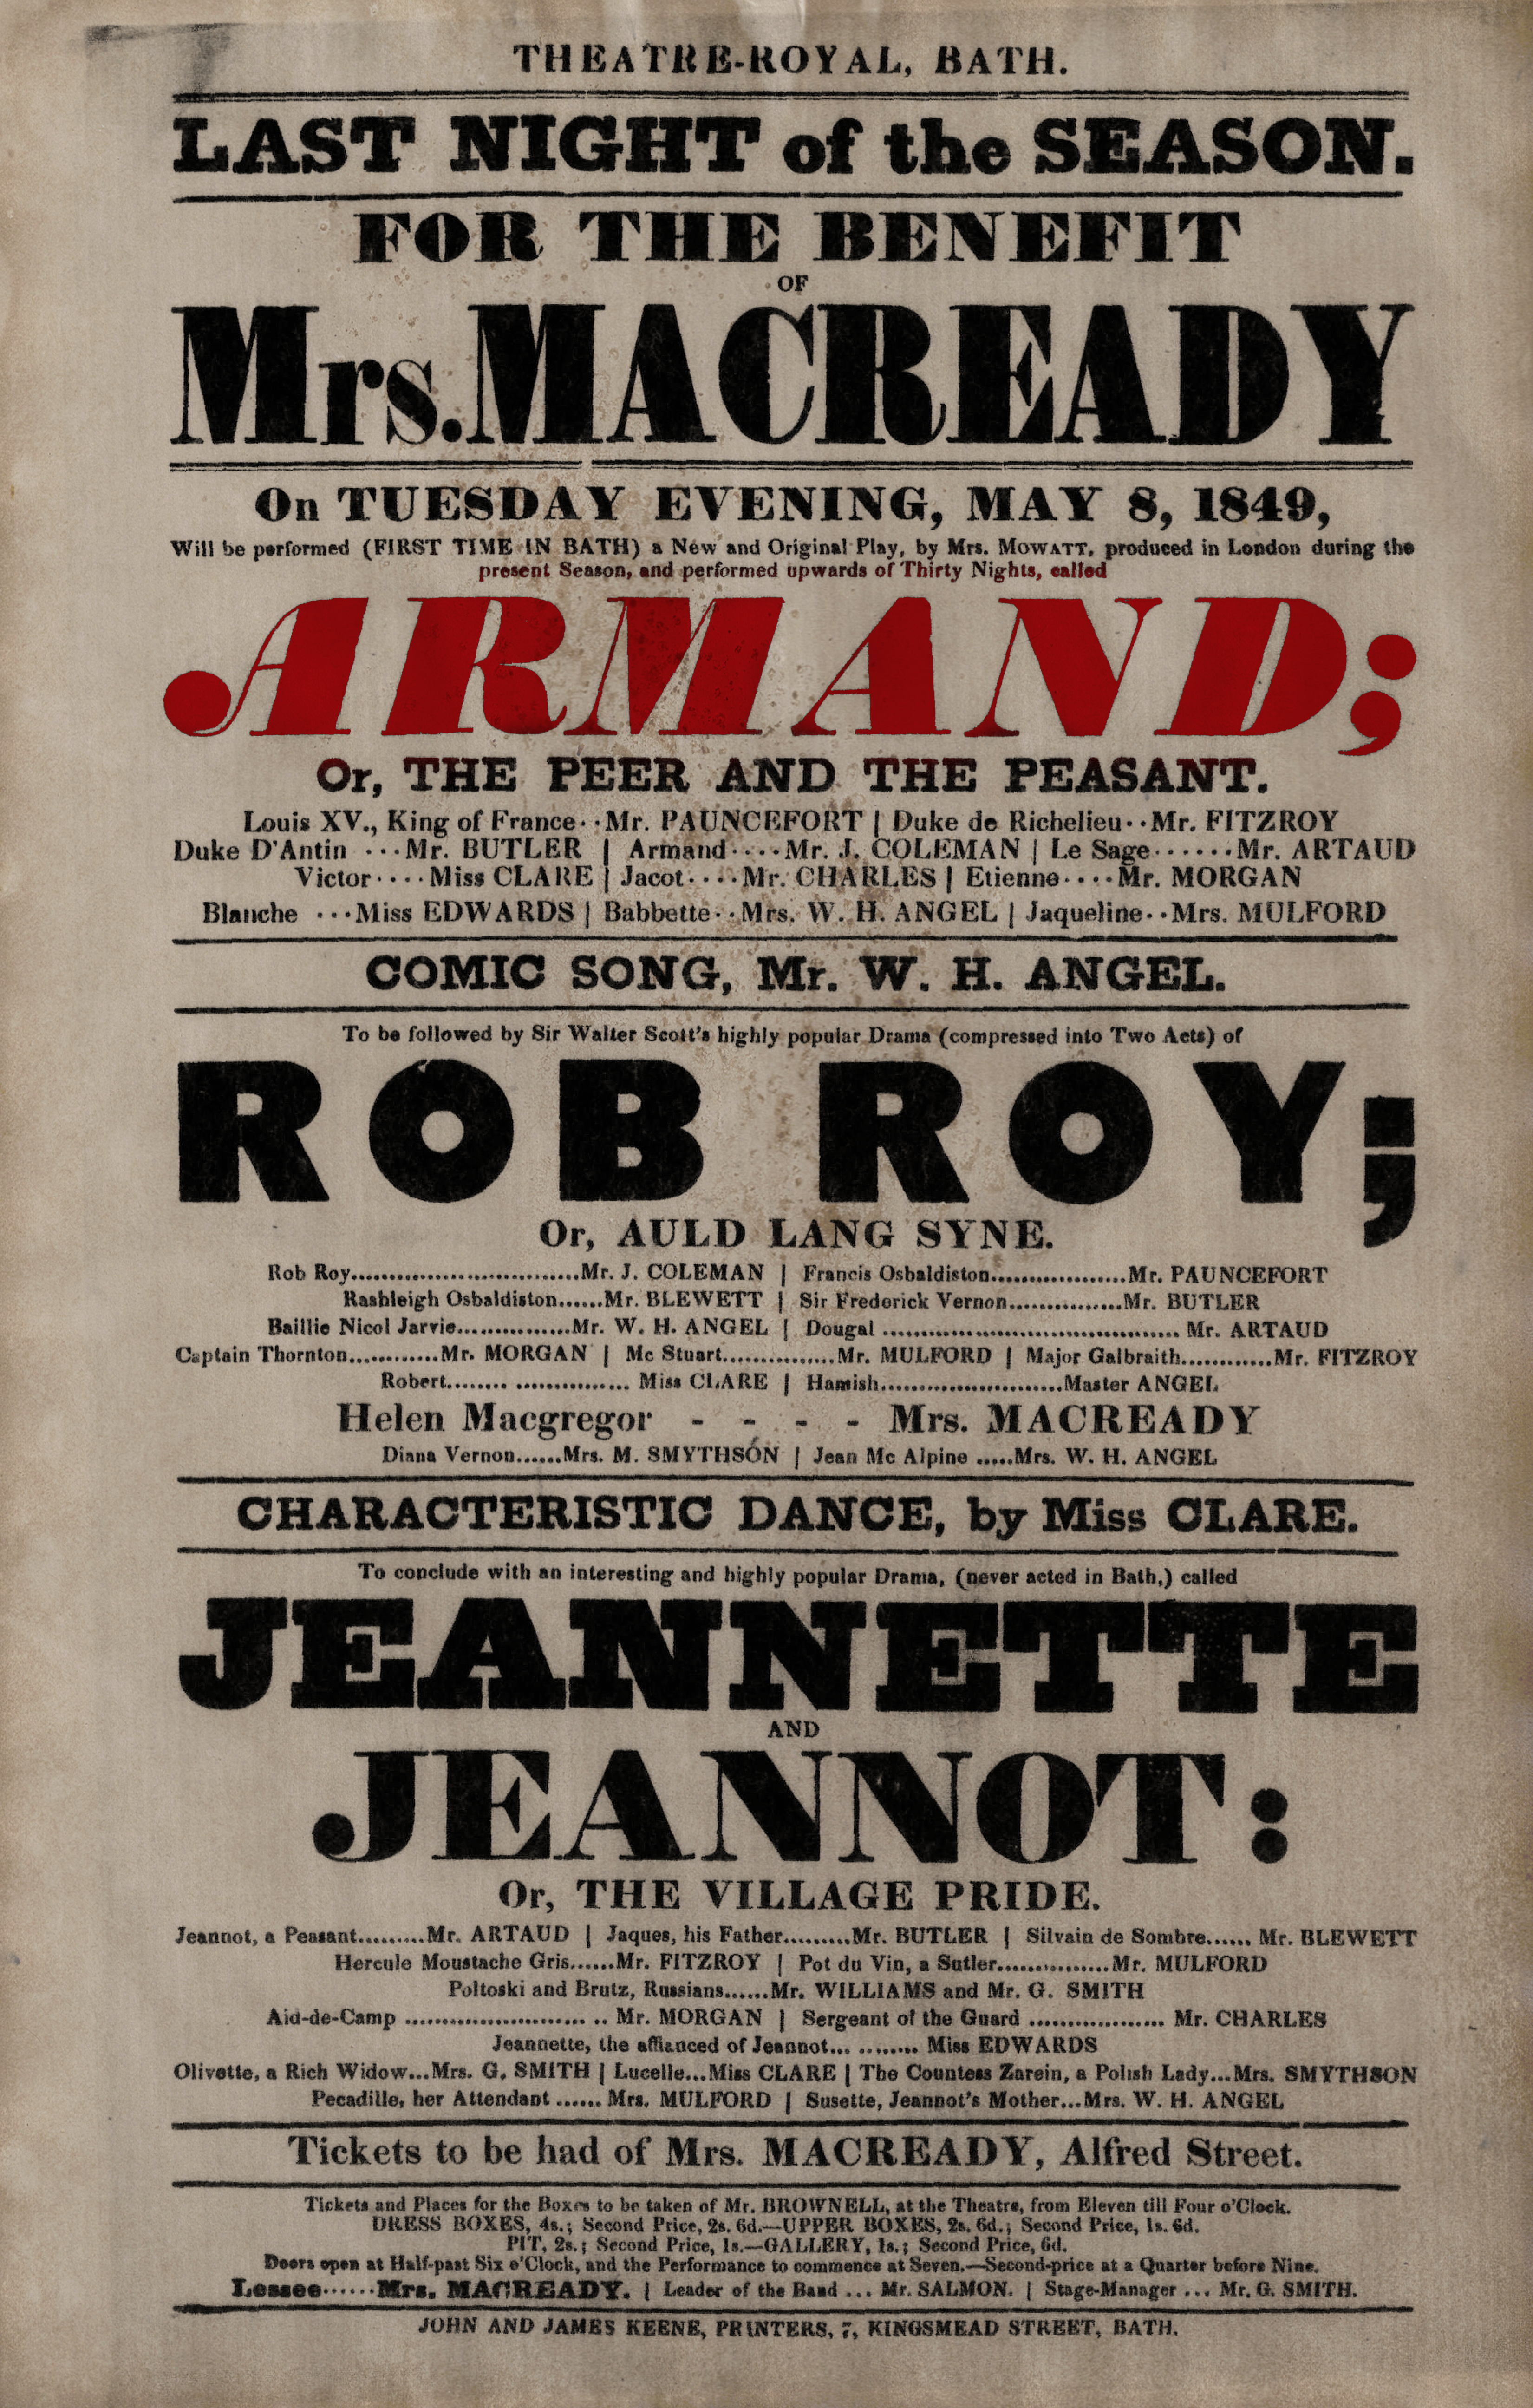 Benefit Performance of Armand, 1849